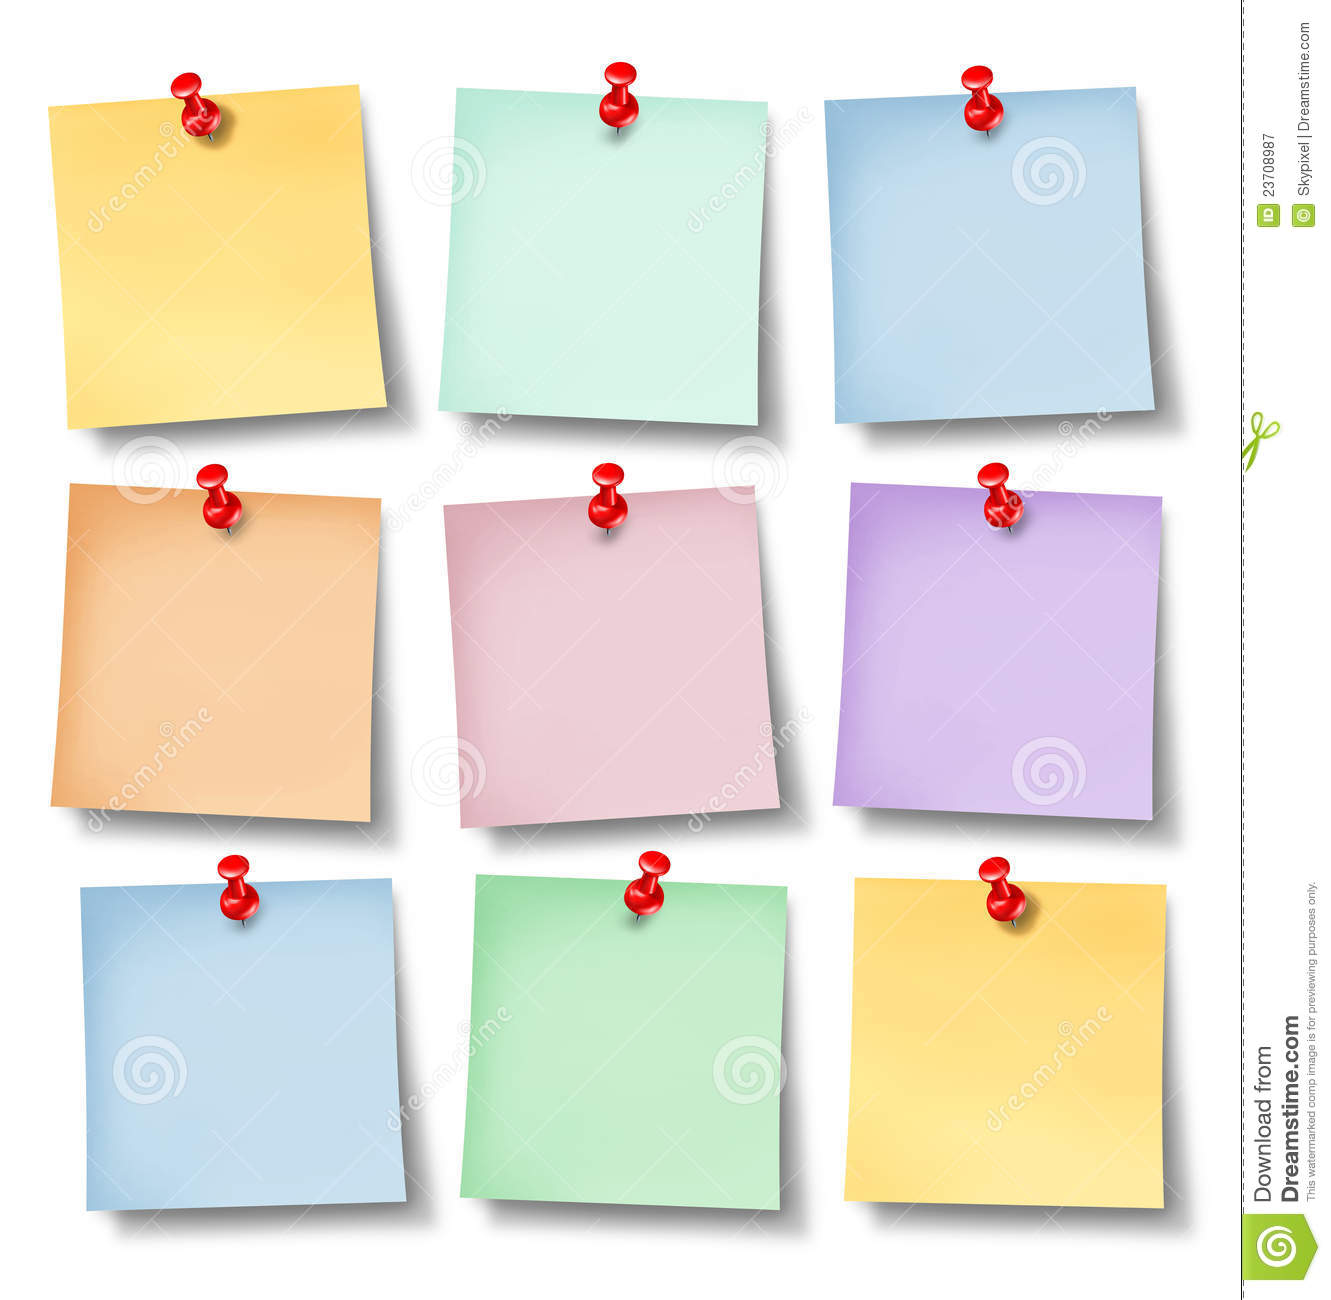 Reminder Office Notes With Six Blank Paper Memos On A White Background